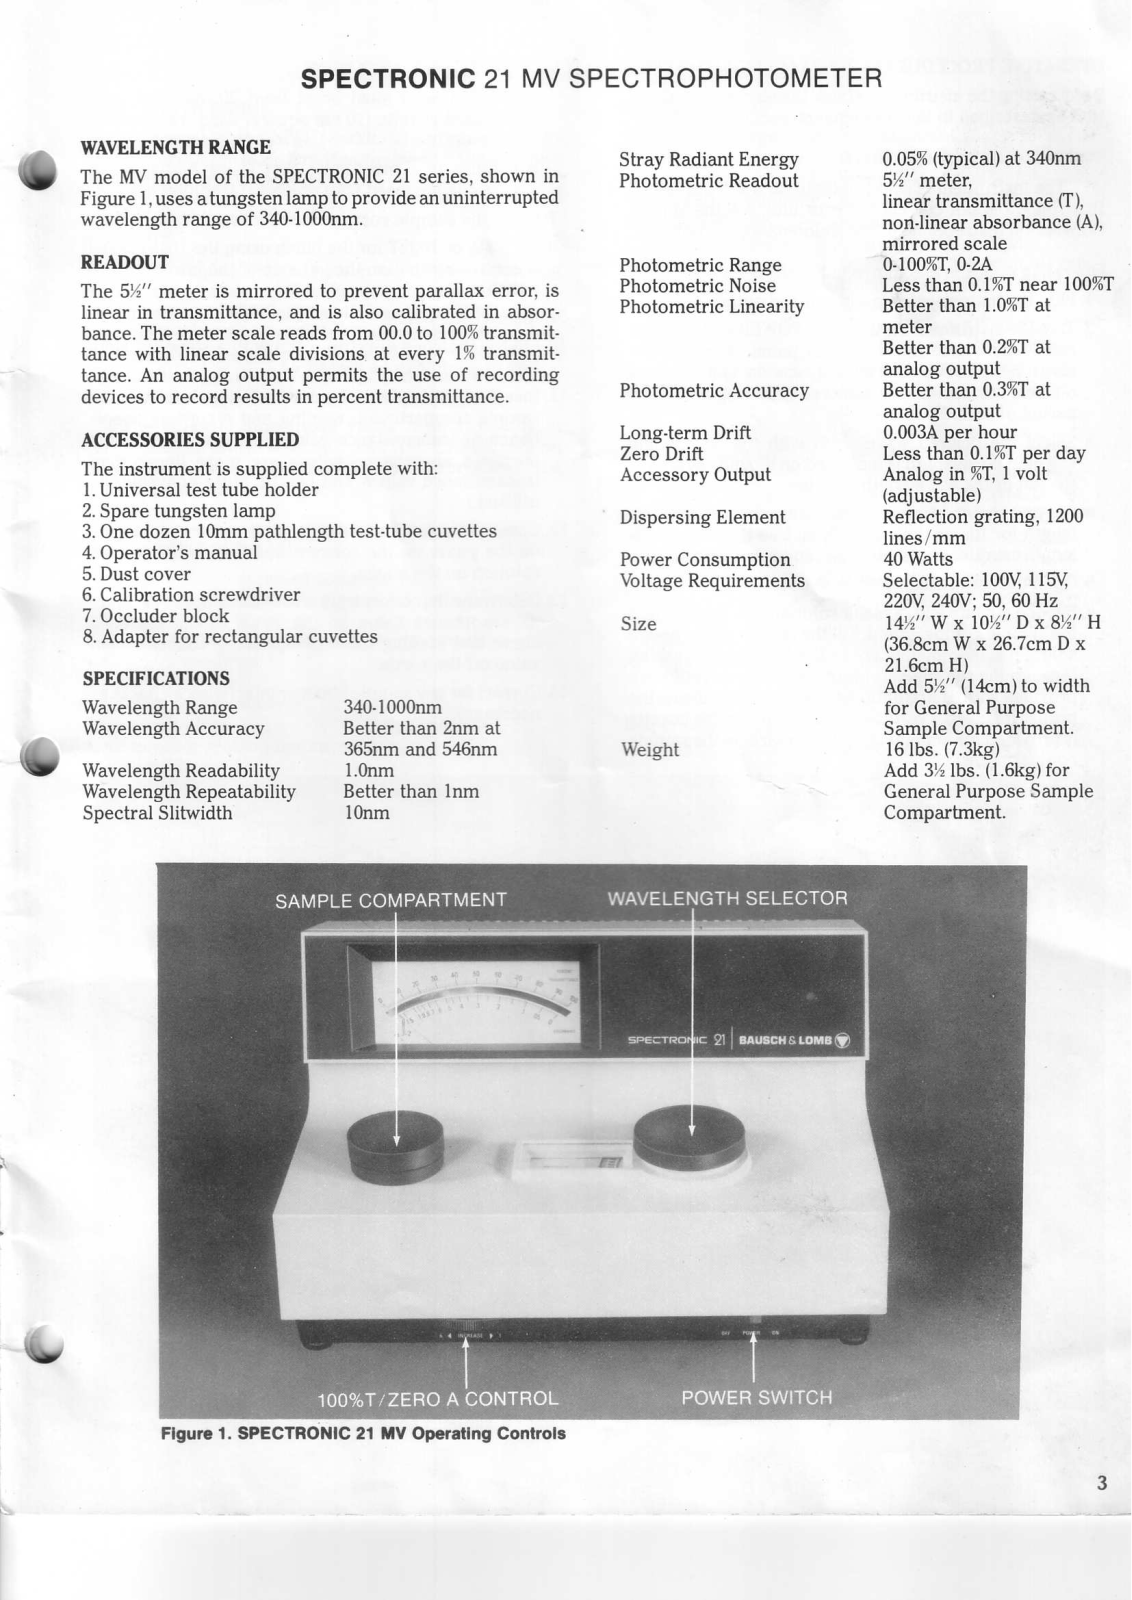 Bausch and Lomb Spectronic 21 MV User manual